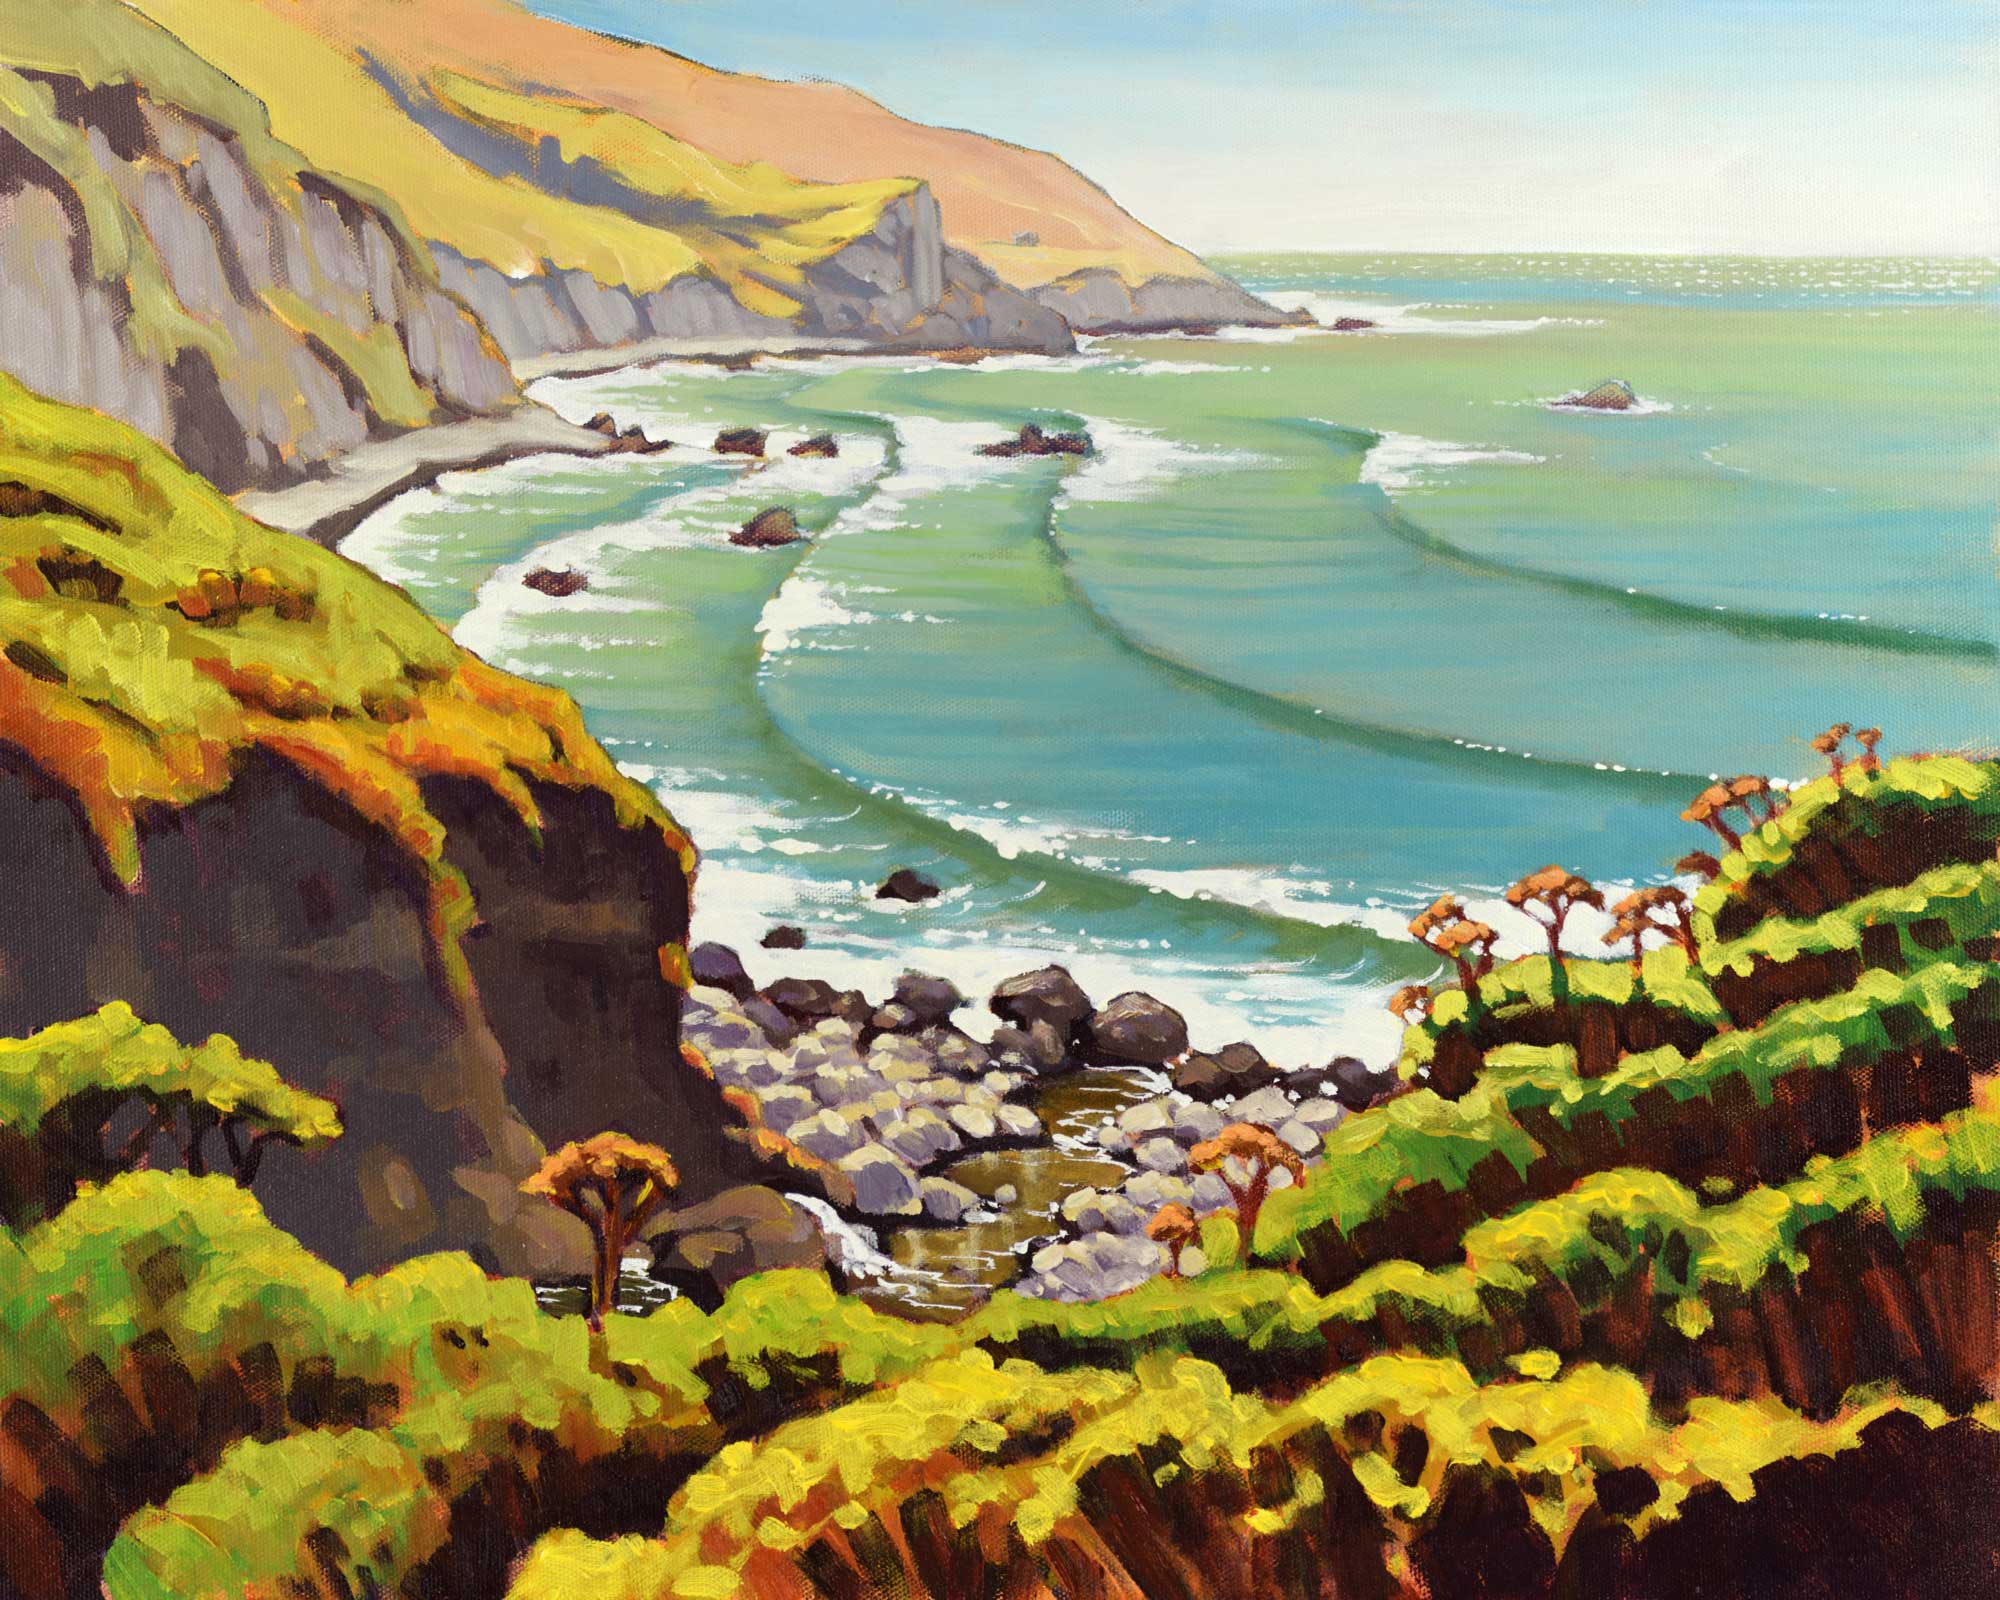 A plein air landscape painiting from the Lost Coast Trail at Sea Lion Gulch on the Humboldt coast of California